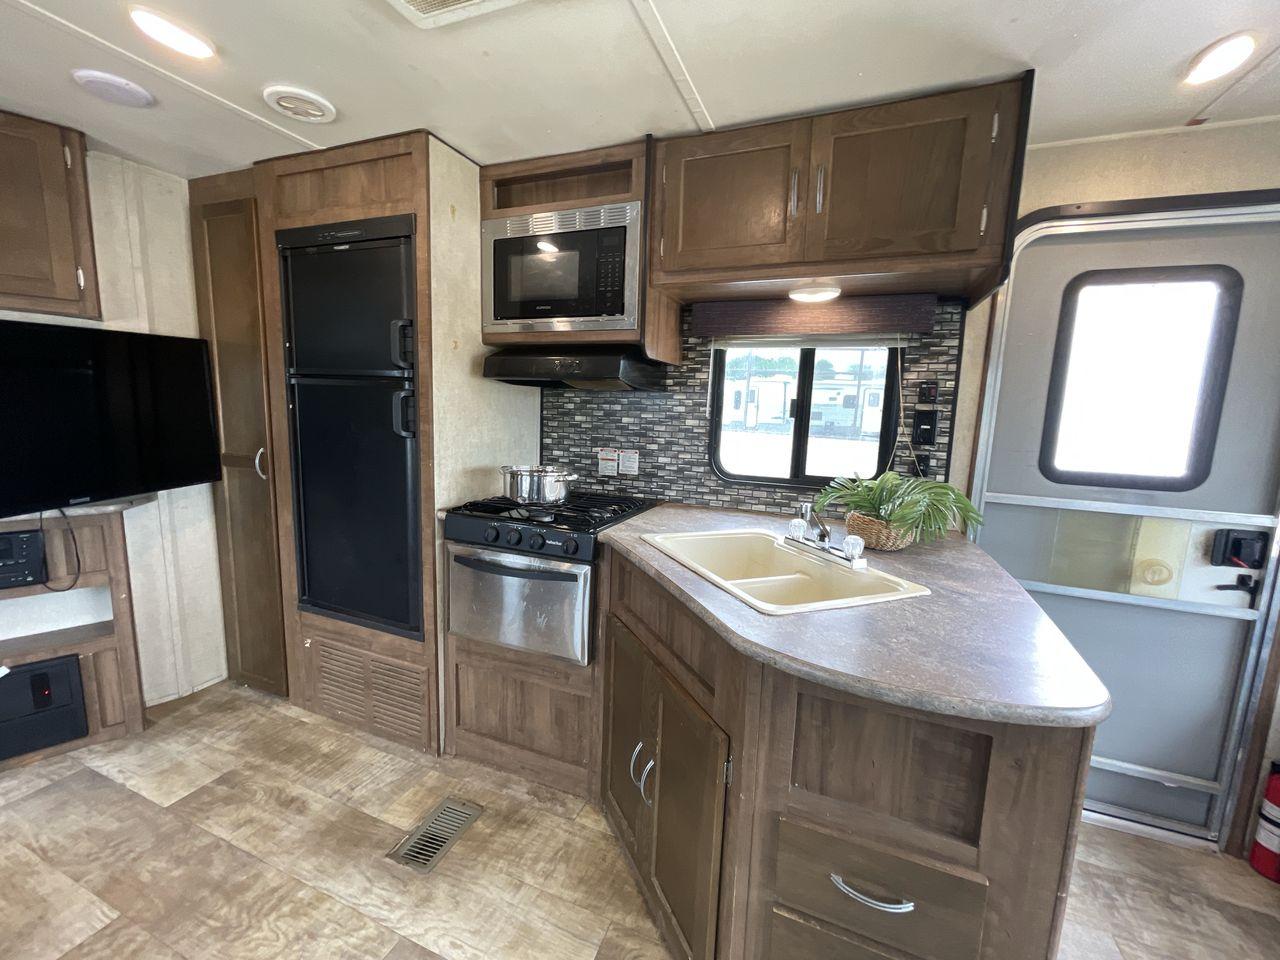 2018 GULFSTREAM TRAILMASTER 262RLS (1NL1GTP2XJ1) , Length: 31.25 ft. | Dry Weight: 6,849 lbs. | Slides: 1 transmission, located at 4319 N Main Street, Cleburne, TX, 76033, (817) 221-0660, 32.435829, -97.384178 - This 2018 Gulf Stream Trailmaster 262RLS travel trailer measures just over 31' in length. It is a dual axle, steel wheel setup with a dry weight of 6,849 lbs and a carrying capacity of 1,421 lbs. With a dry weight of 6,849 lbs., the Trailmaster 262RLS offers easy maneuverability without compromising - Photo #10